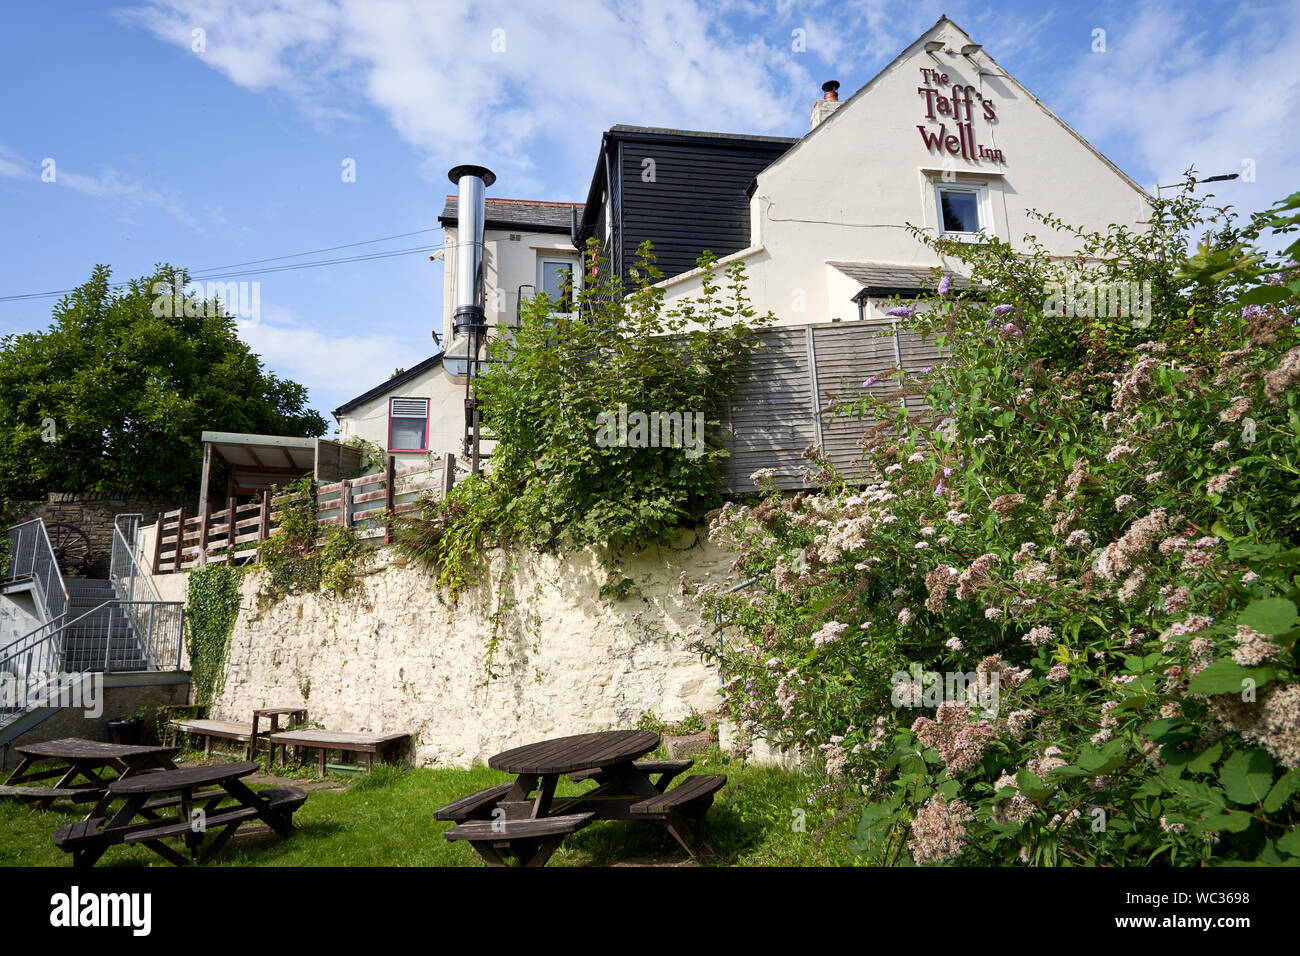 The Taff's Well Inn, Taff's Well, South Wales Stock Photo